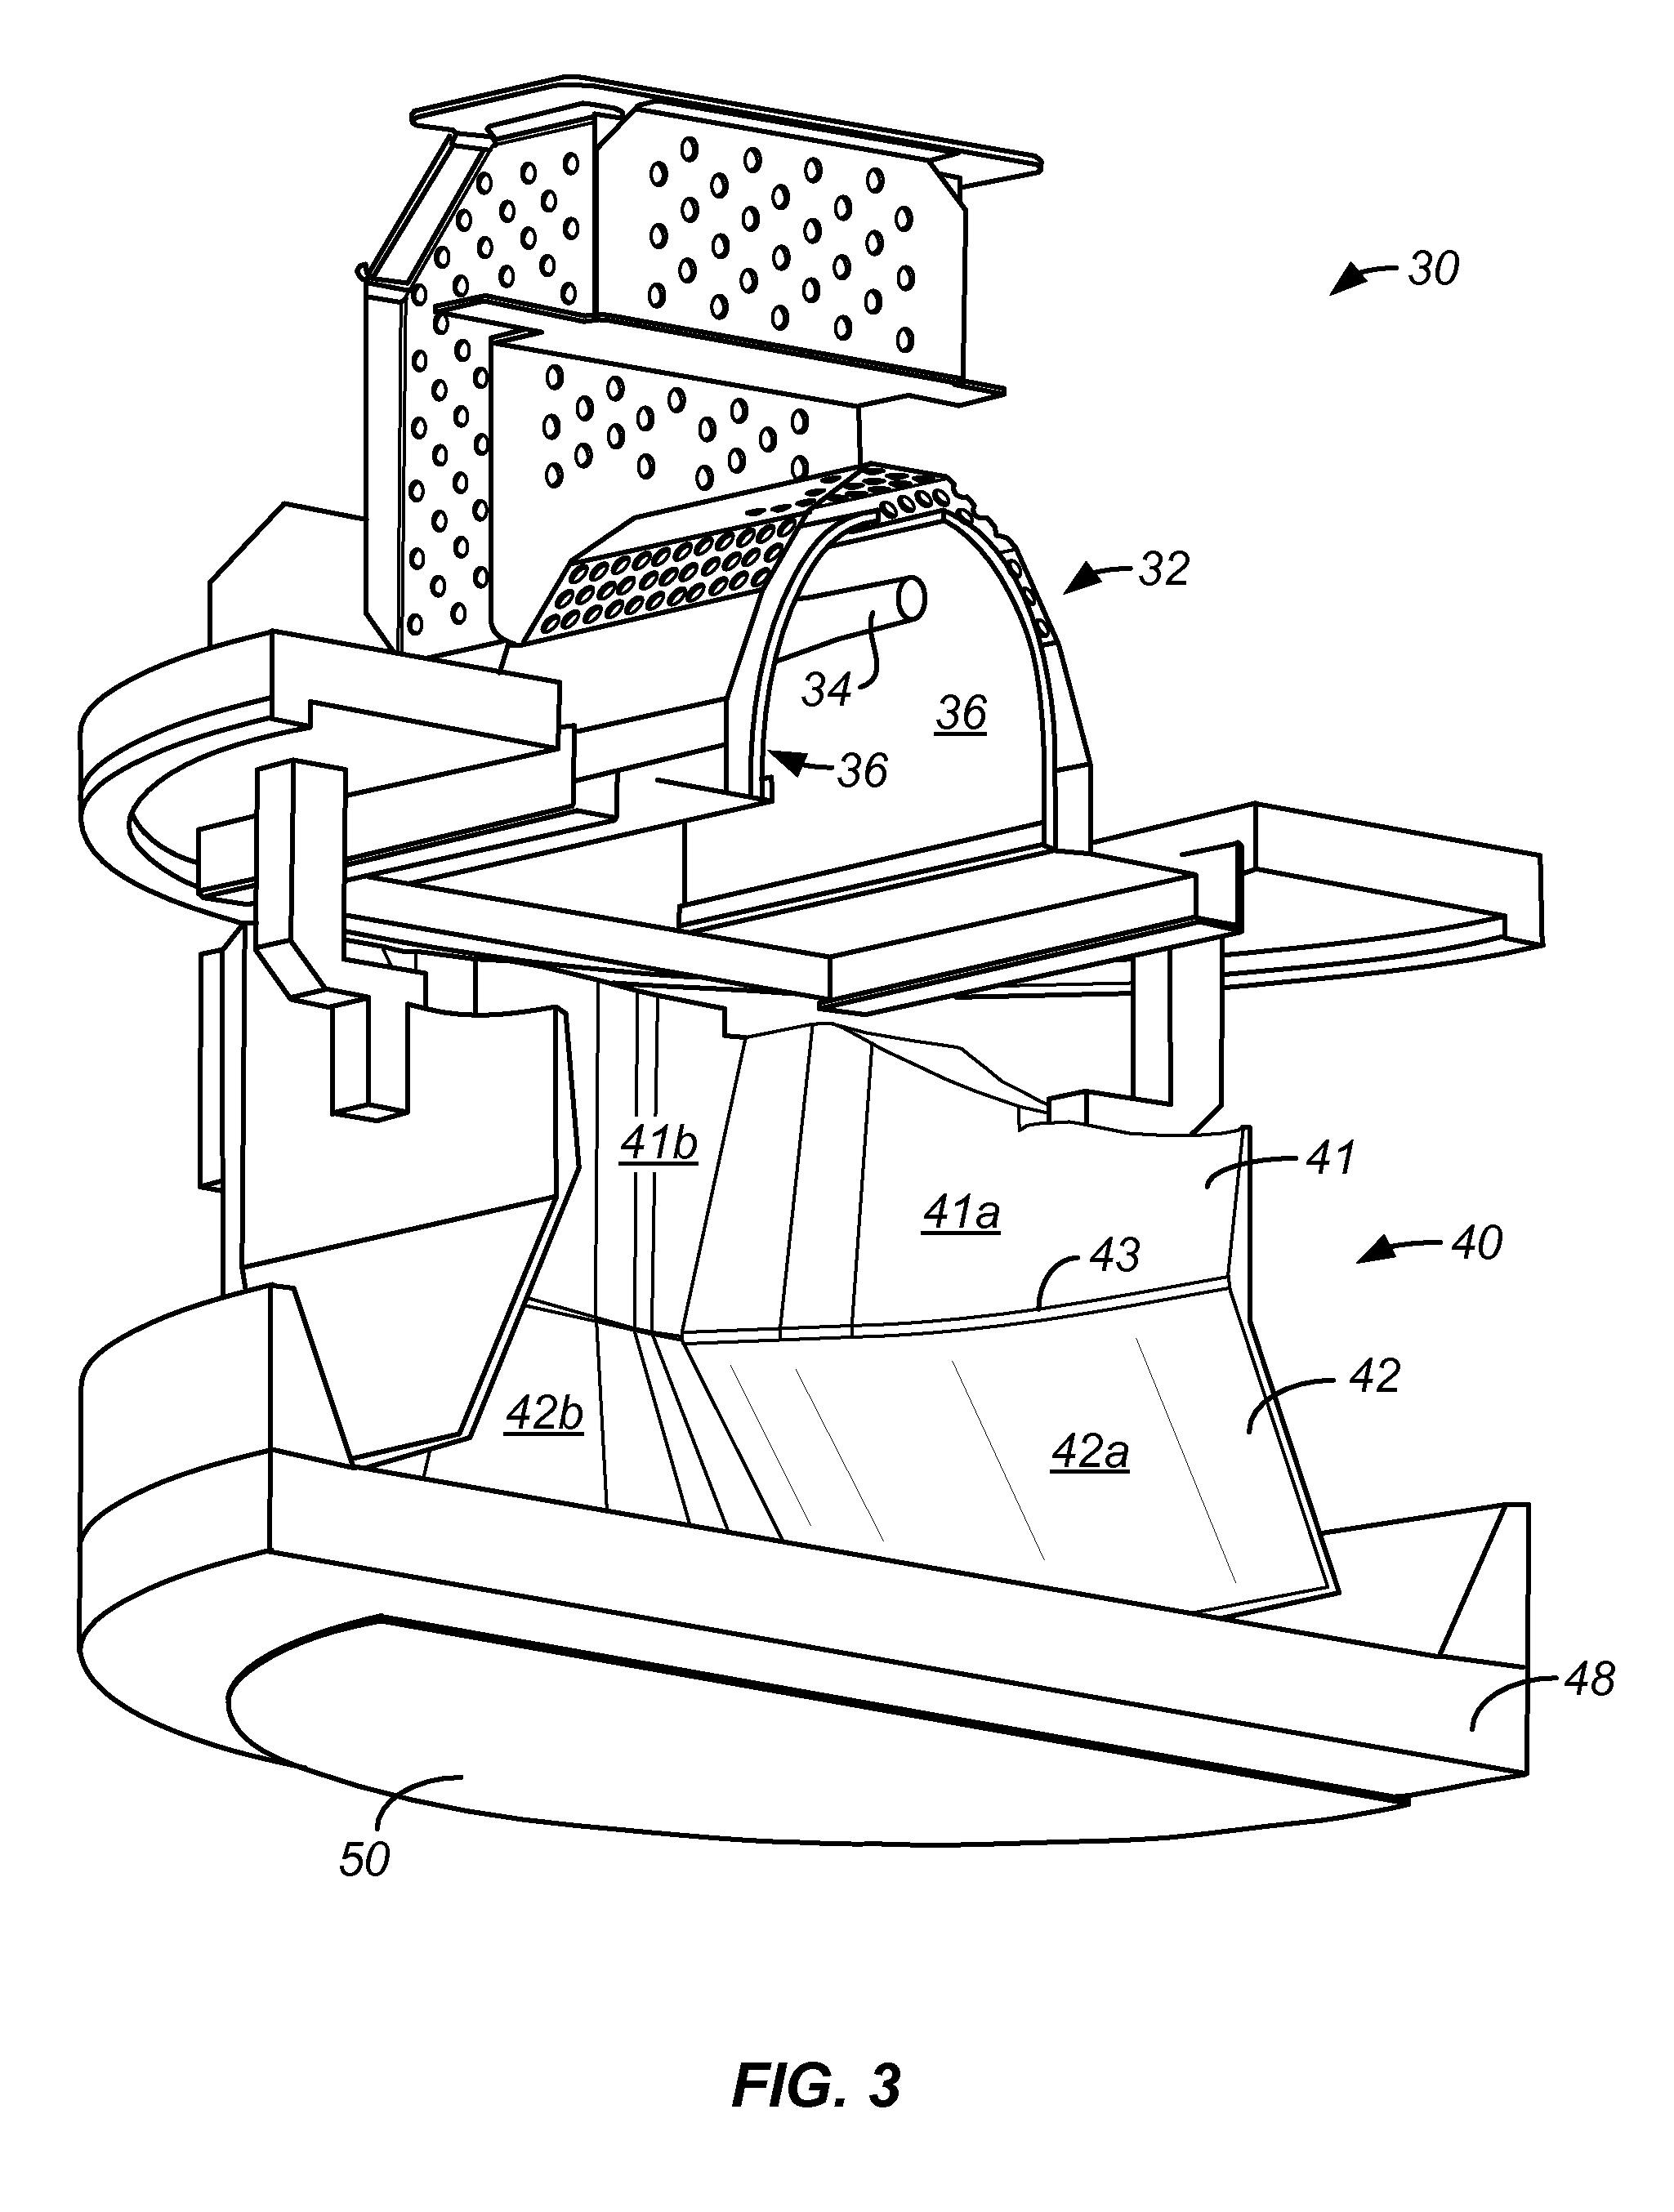 Apparatus and method for exposing a substrate to UV radiation while monitoring deterioration of the UV source and reflectors